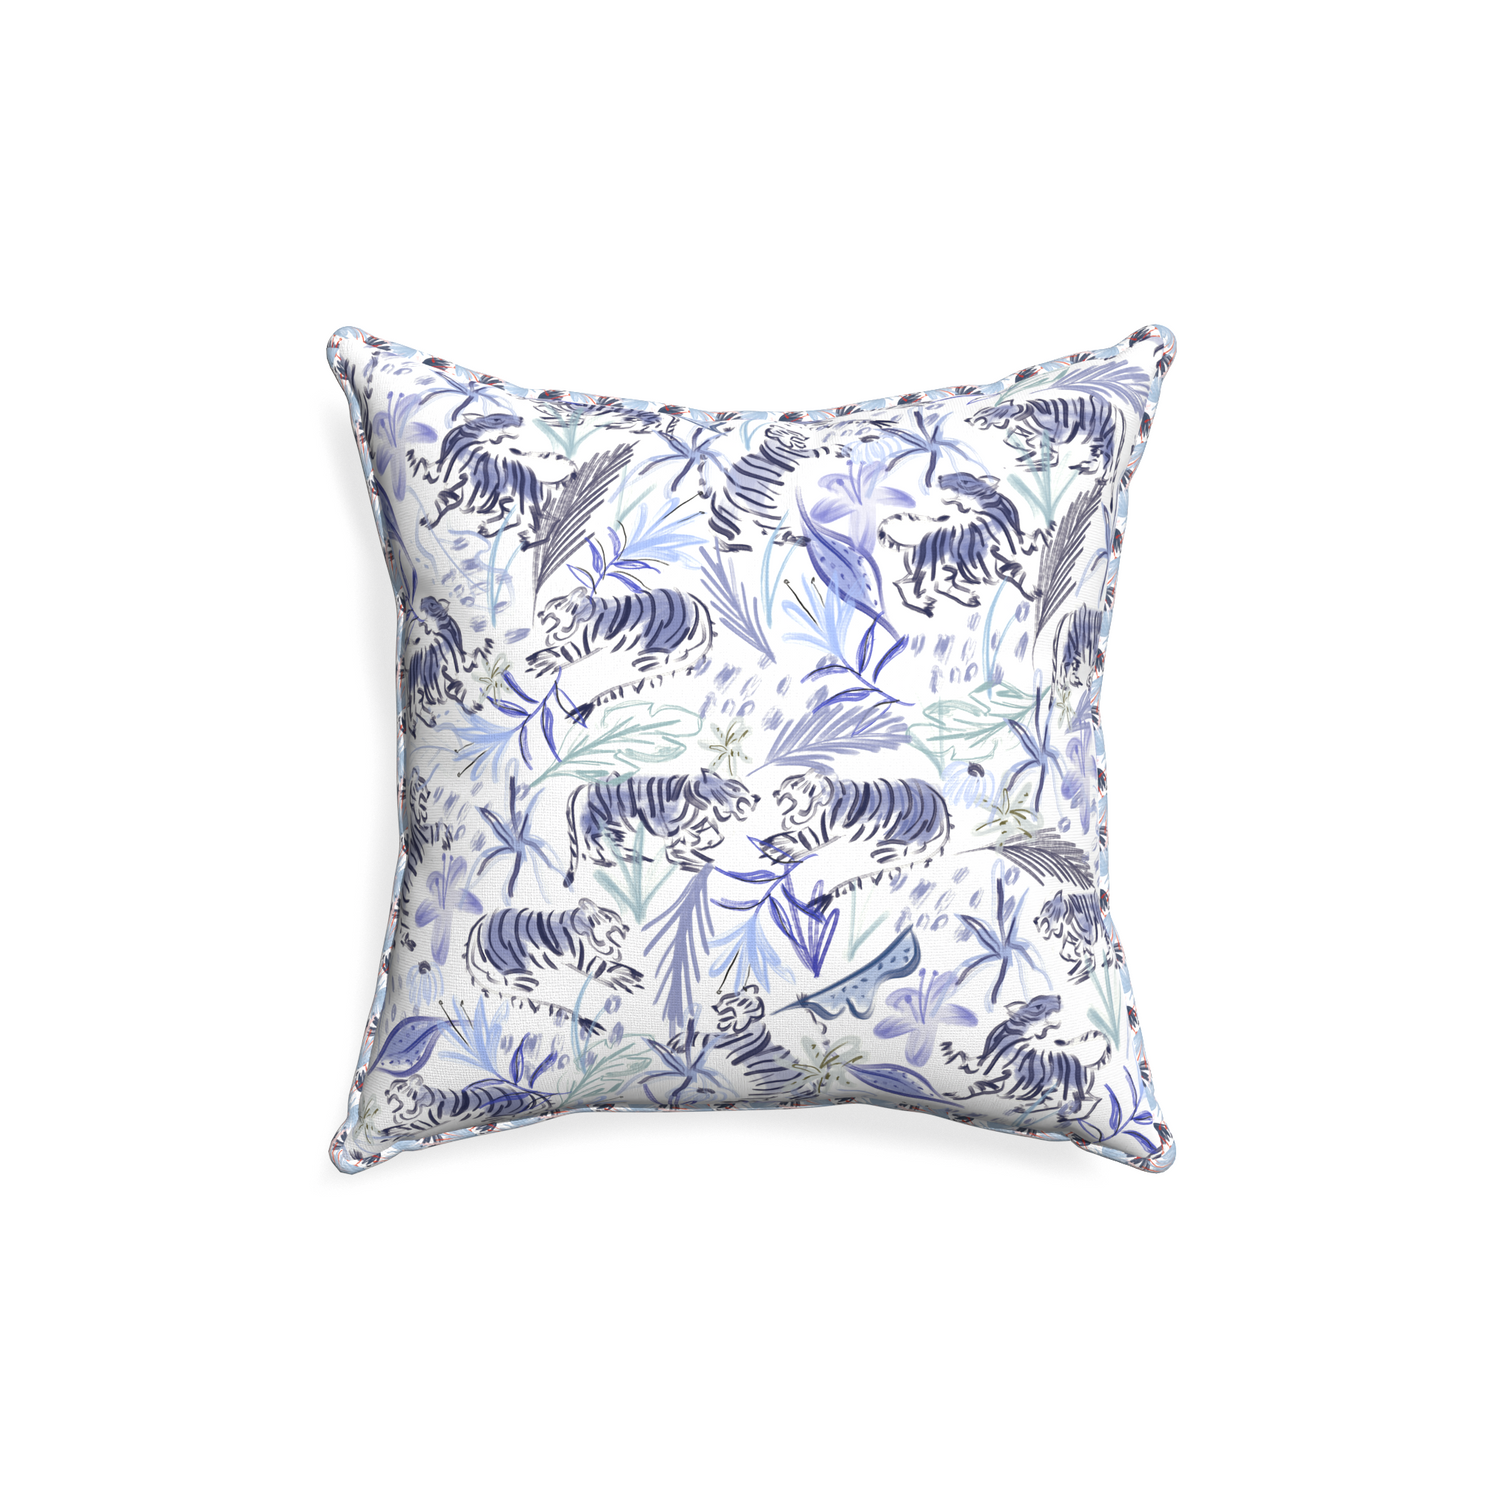 18-square frida blue custom blue with intricate tiger designpillow with e piping on white background